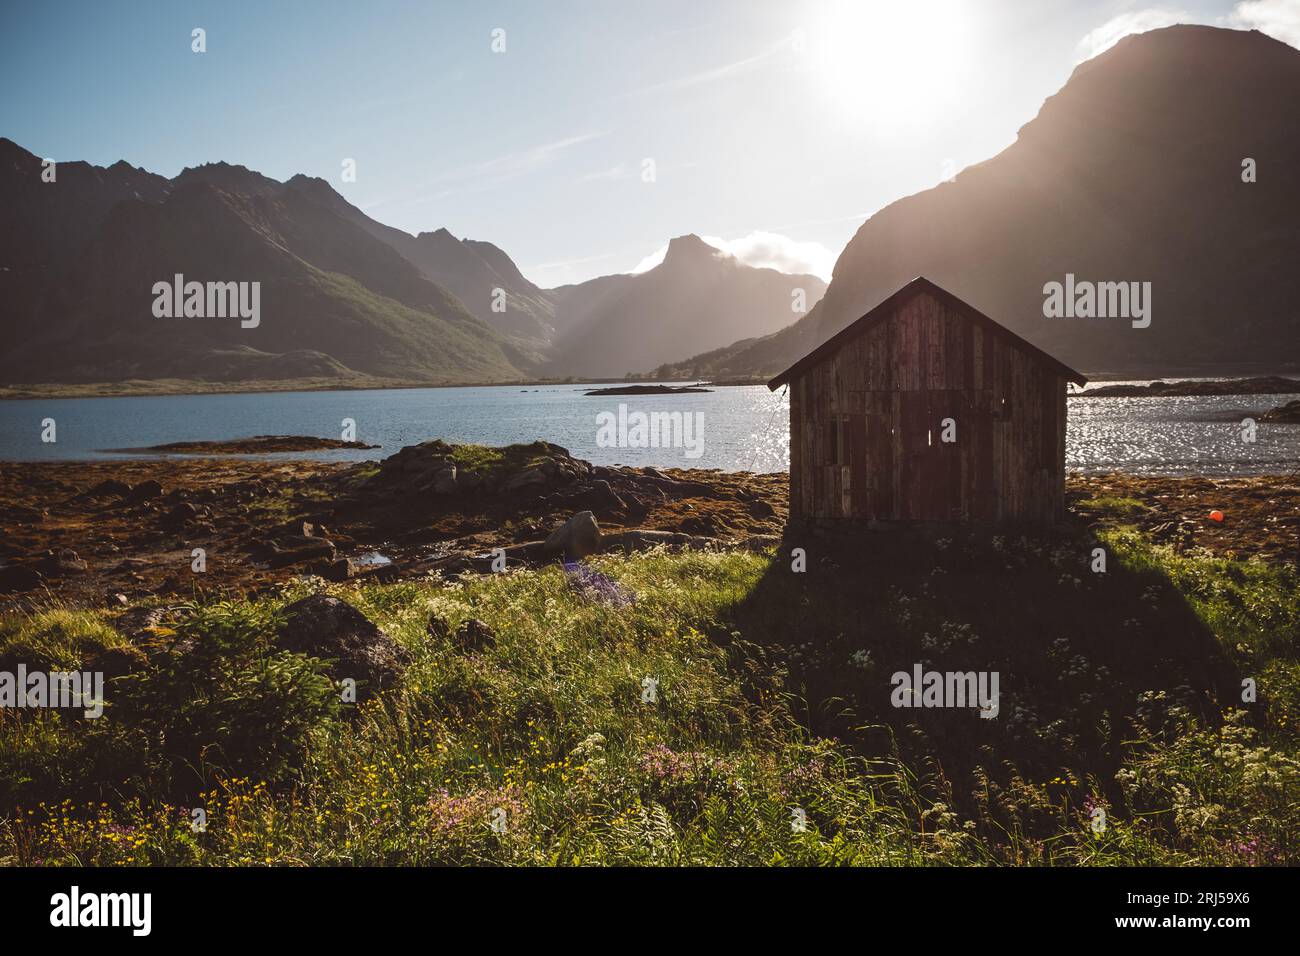 View of a wooden houseboy the lake surrounded by mountains Stock Photo